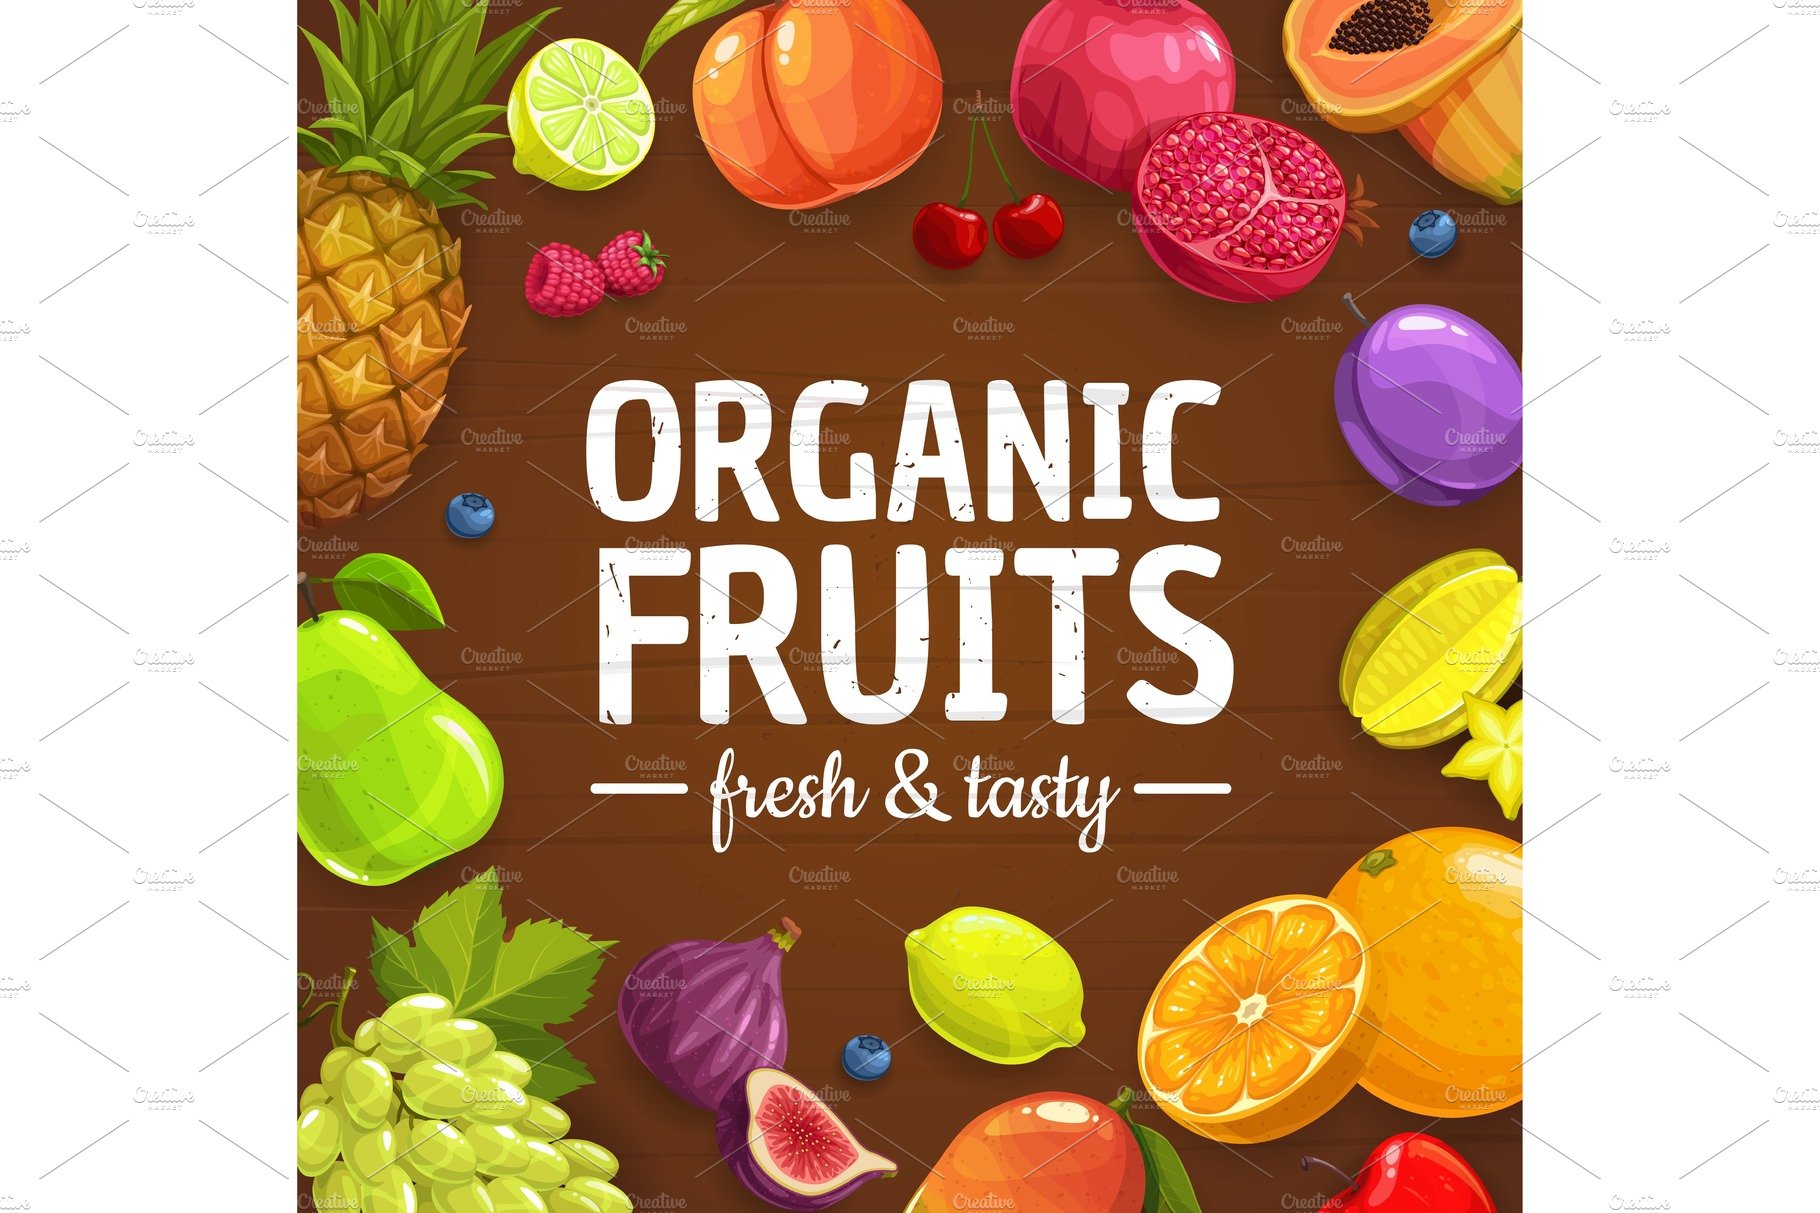 Fresh fruits and berries cover image.